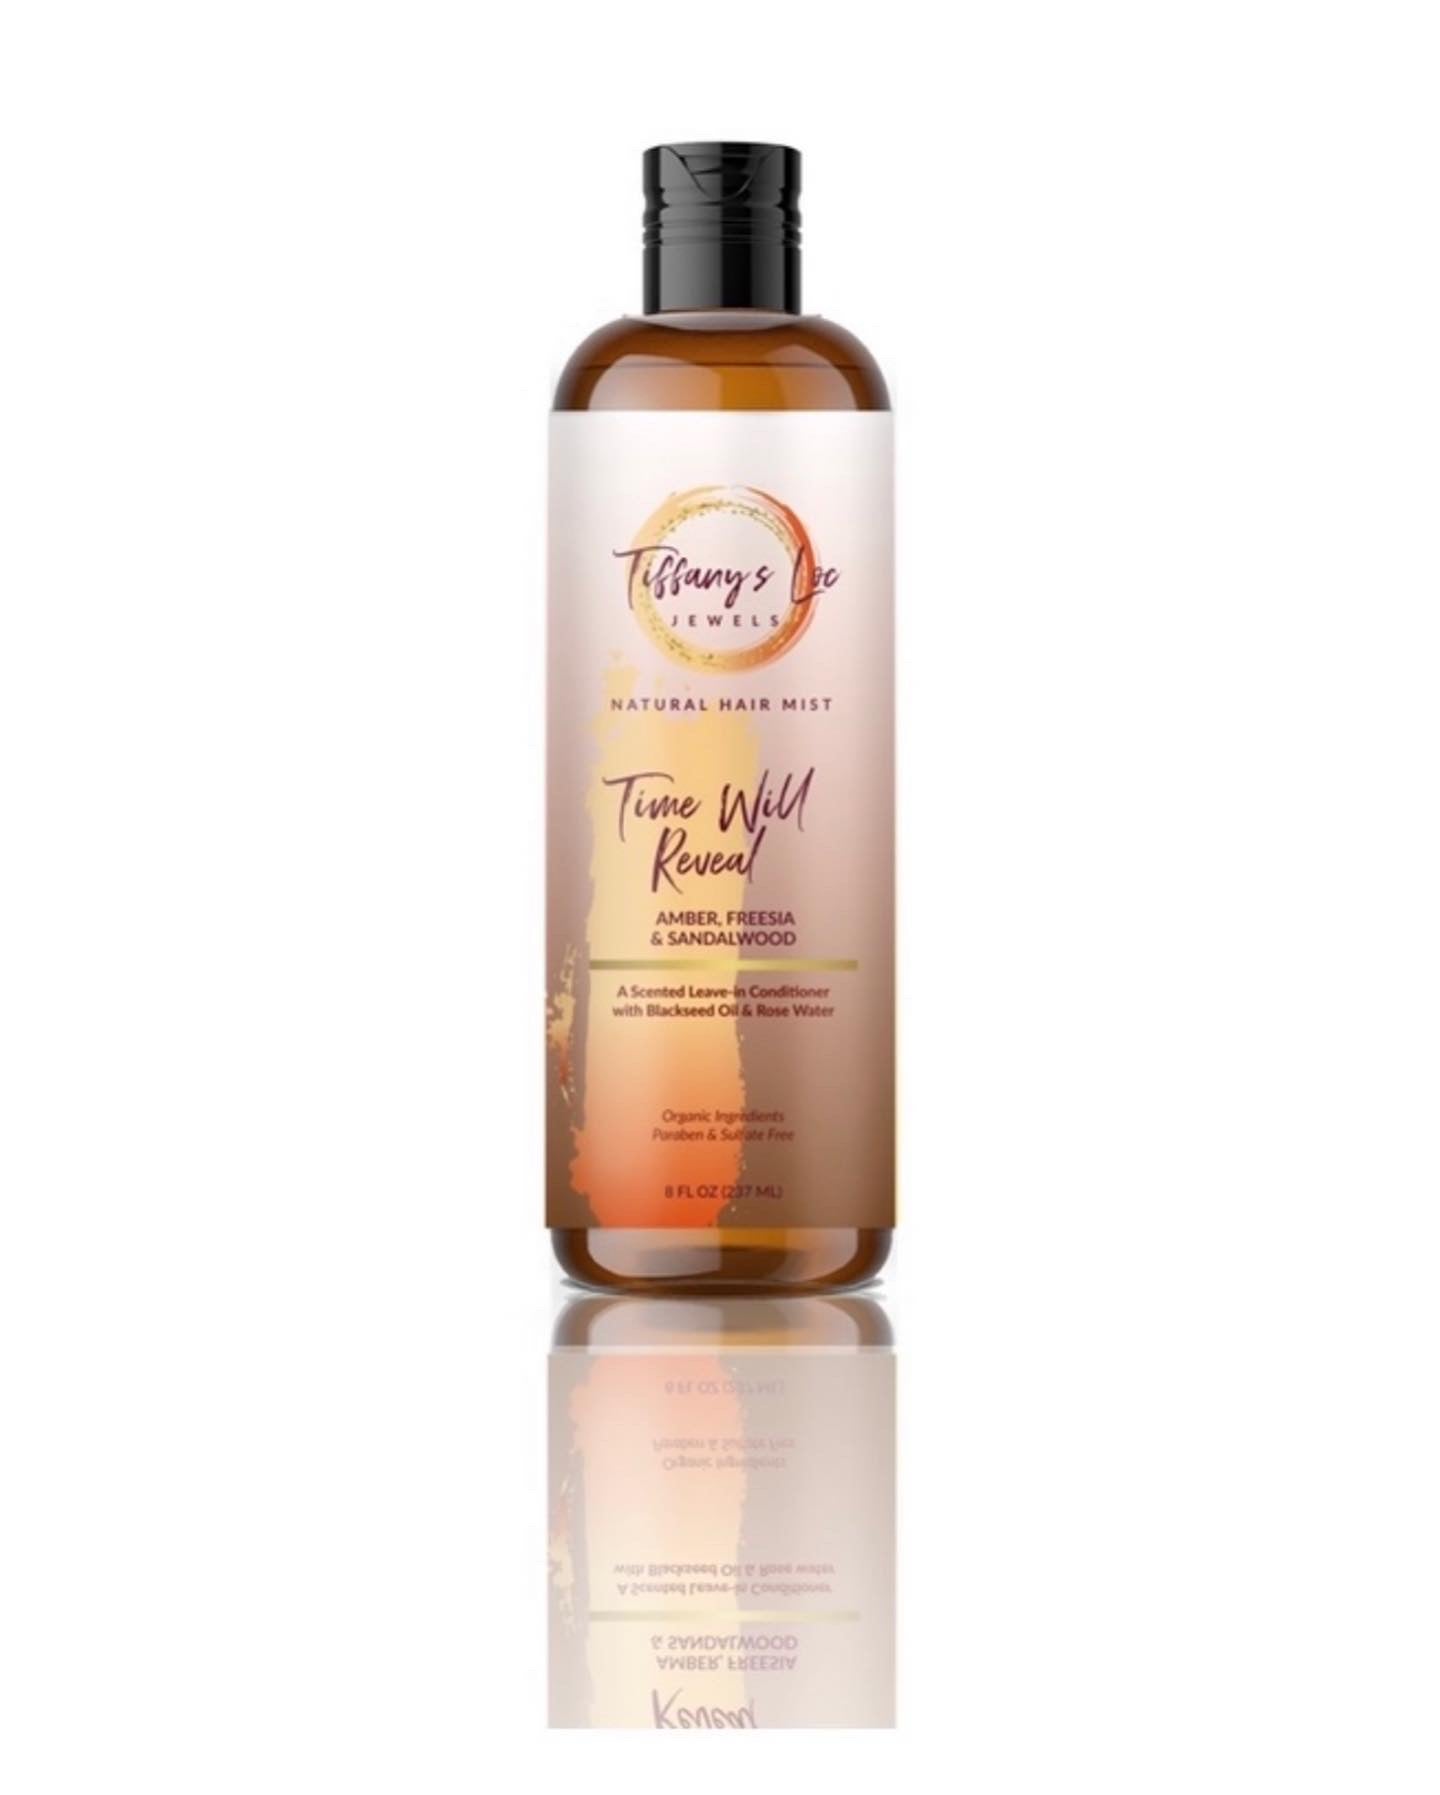 TIME WILL REVEAL AMBER, FREESIA & SANDALWOOD NATURAL HAIR MIST with BLACKSEED OIL & ROSEWATER